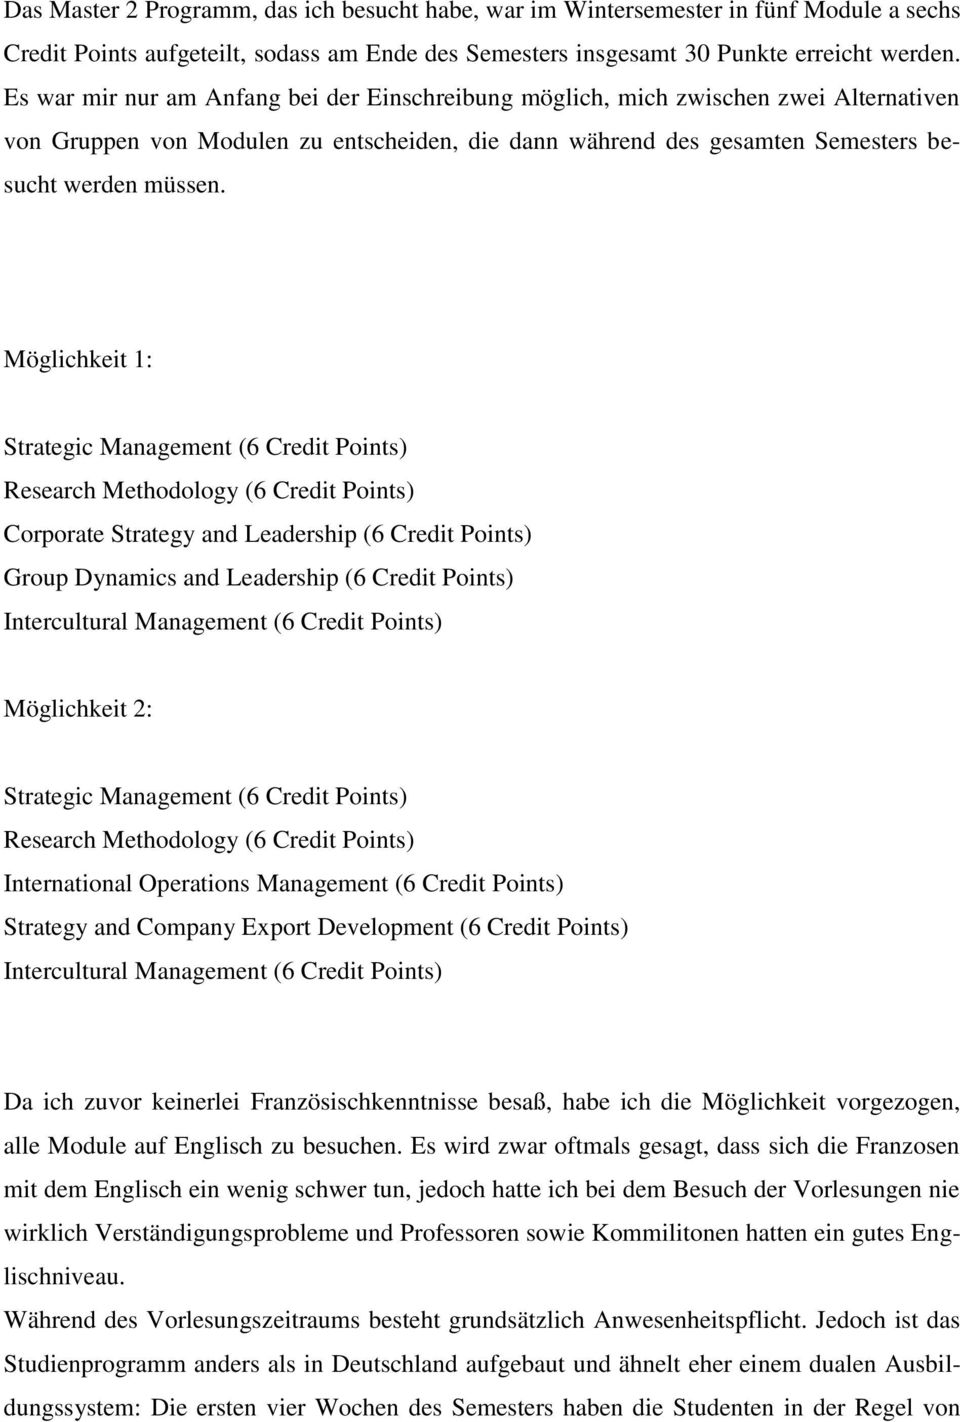 Möglichkeit 1: Strategic Management (6 Credit Points) Research Methodology (6 Credit Points) Corporate Strategy and Leadership (6 Credit Points) Group Dynamics and Leadership (6 Credit Points)